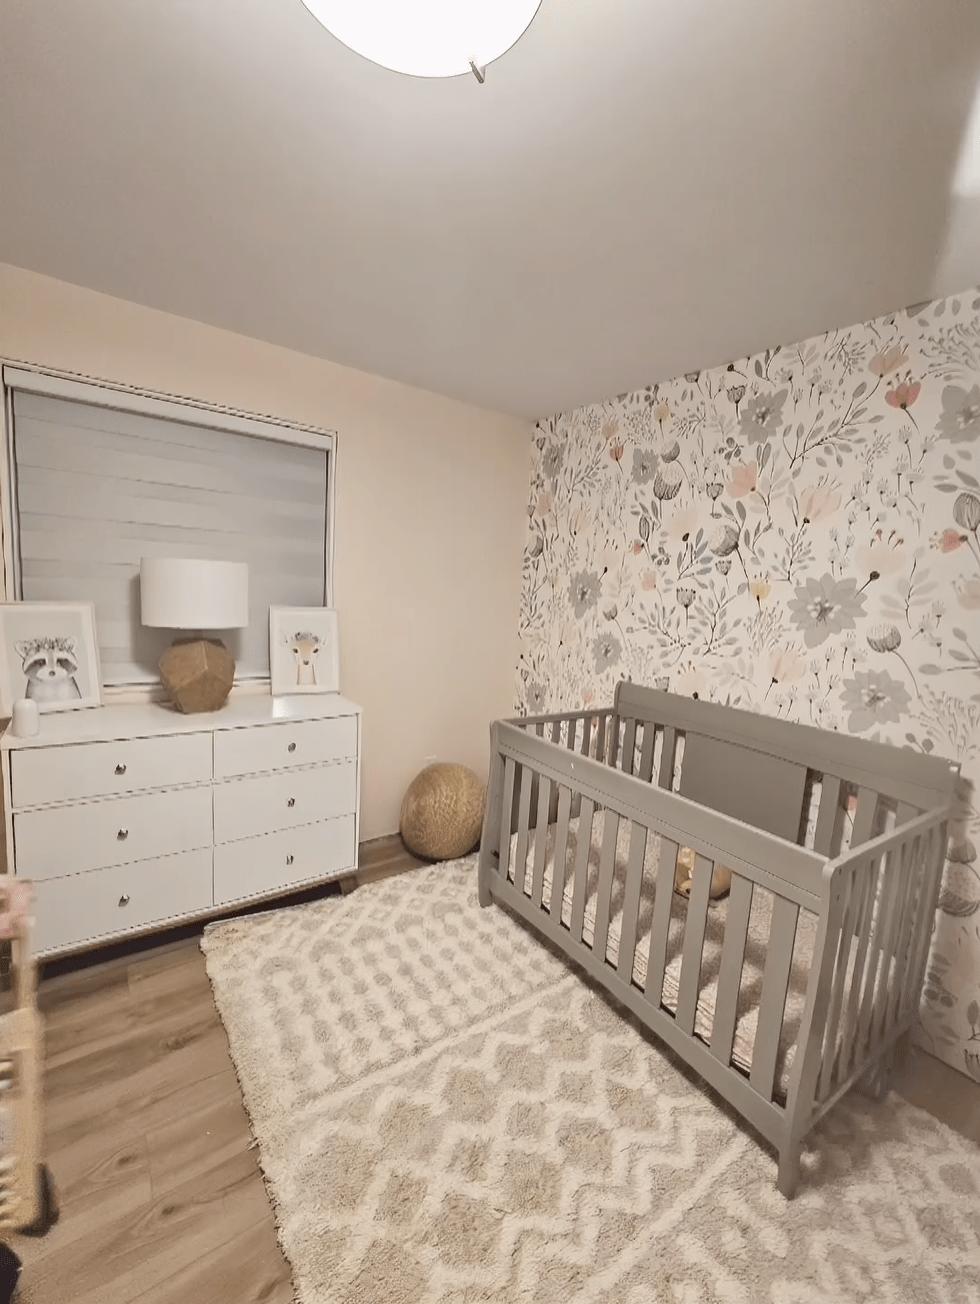 Nursery room with floral wallpaper, crib, dresser, and textured rug after decoration.